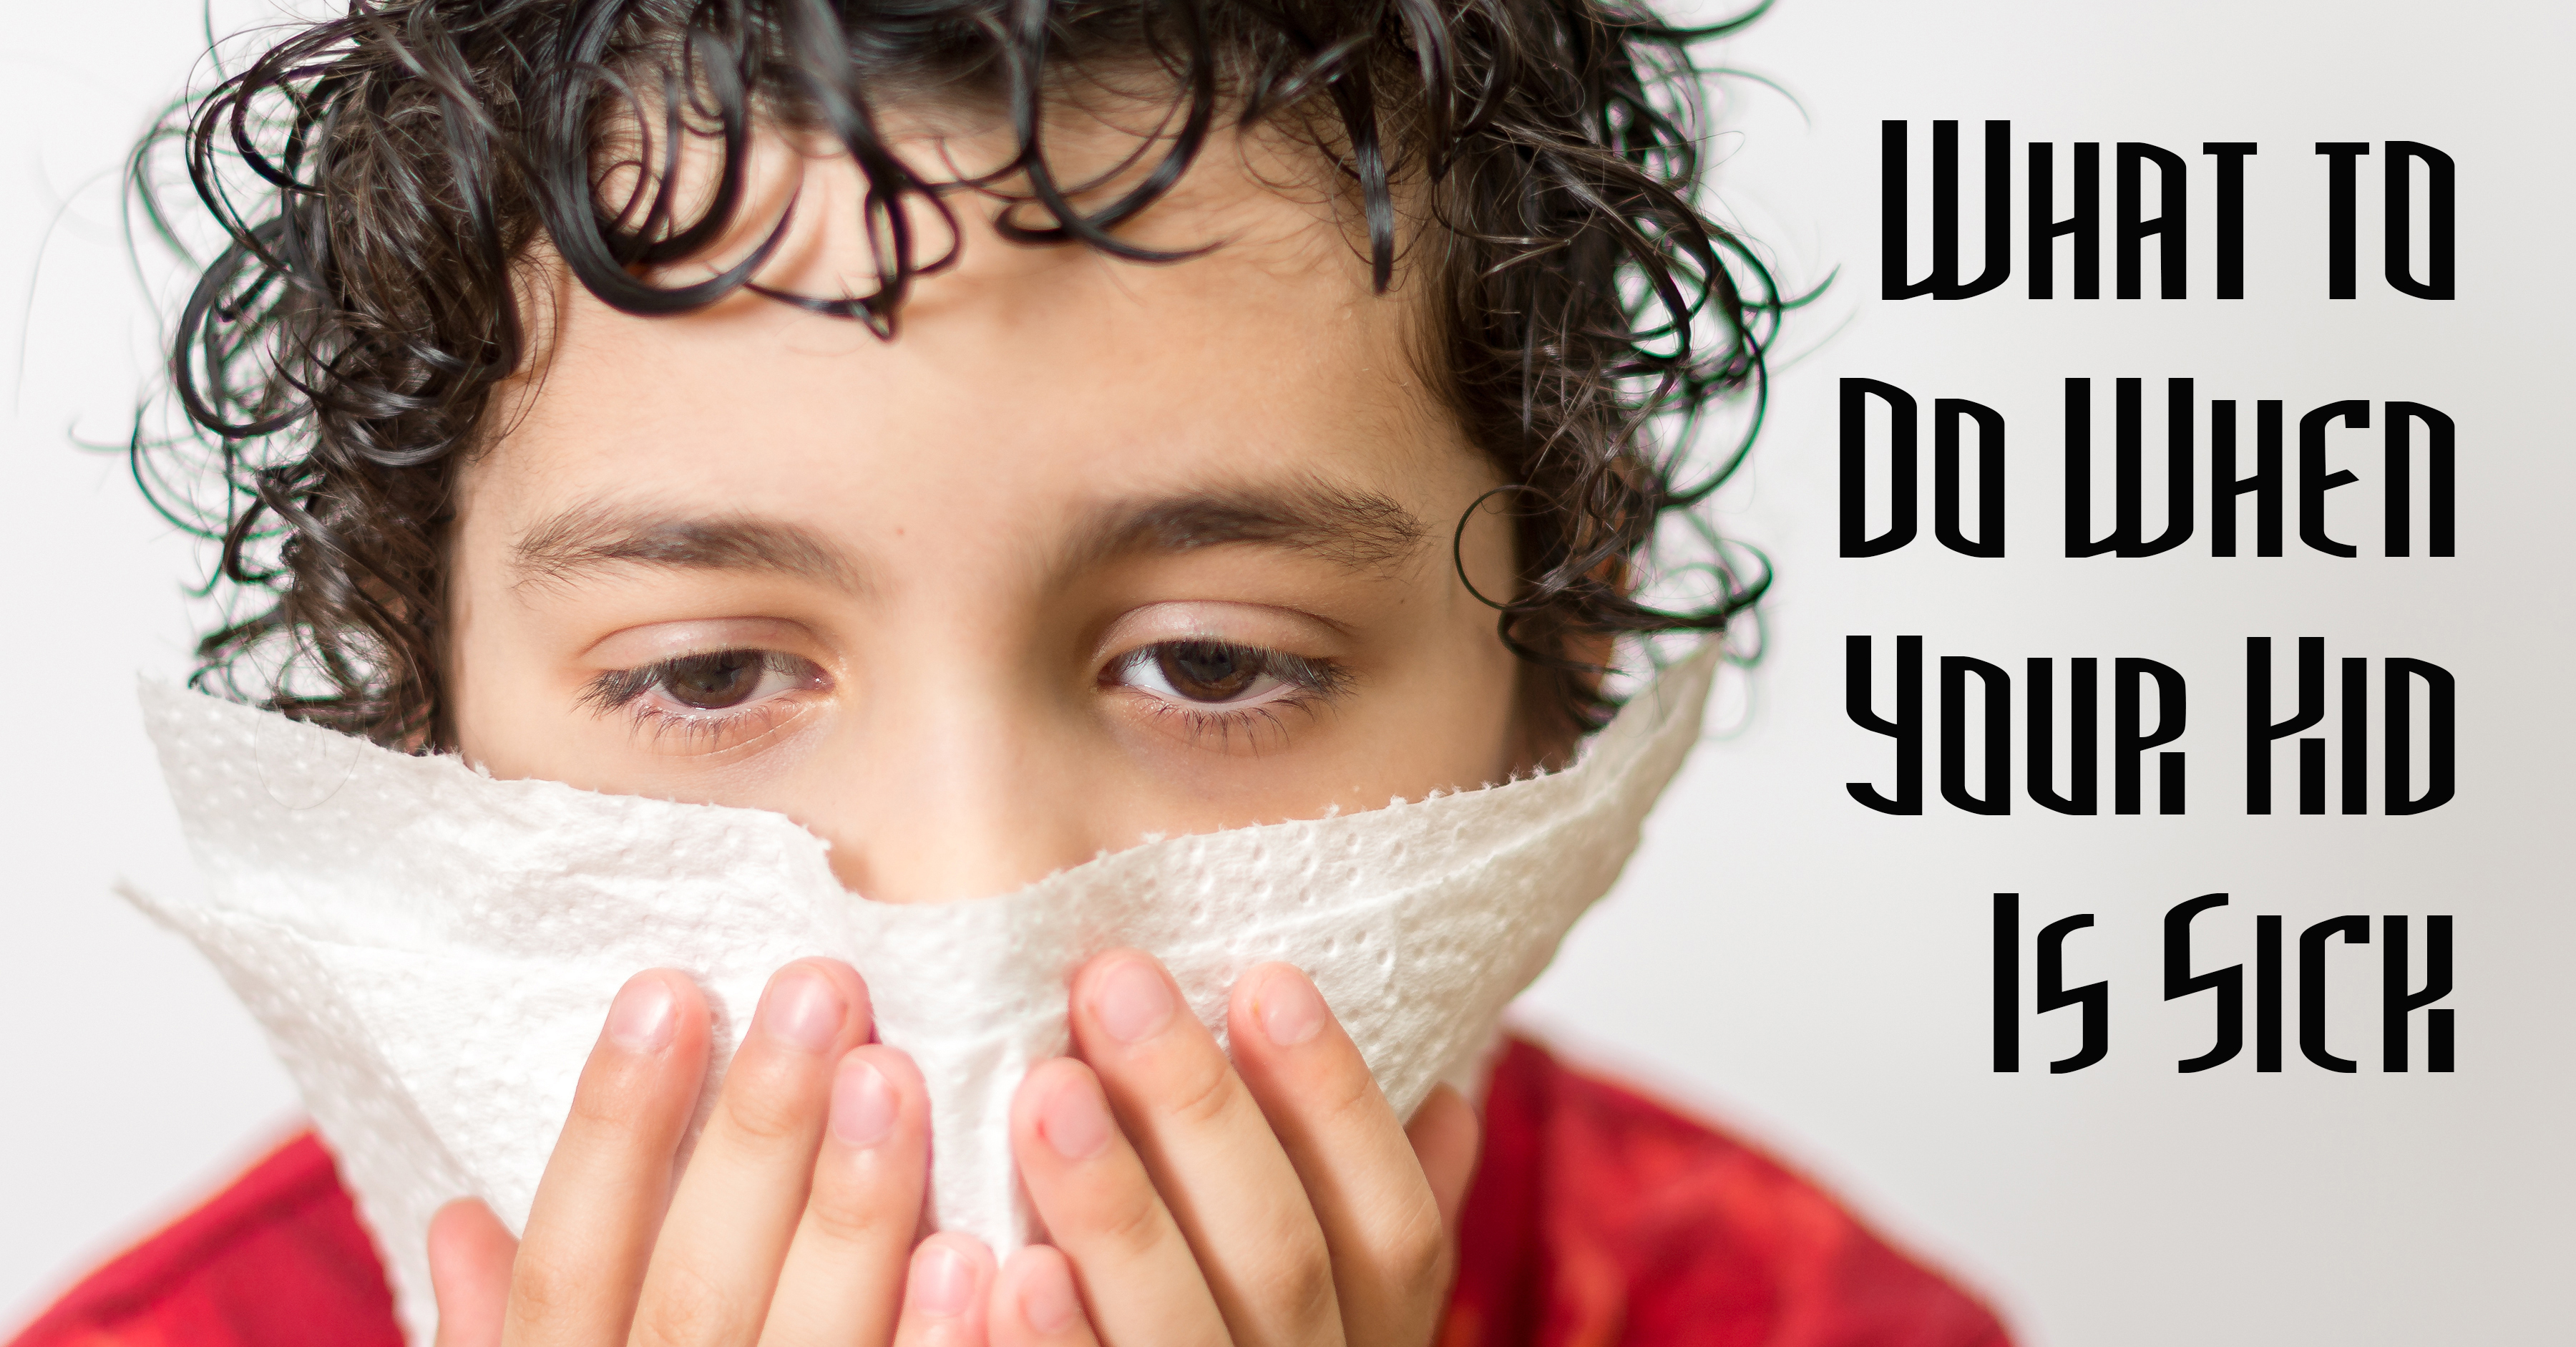 What to Do When Your Kid Is Sick